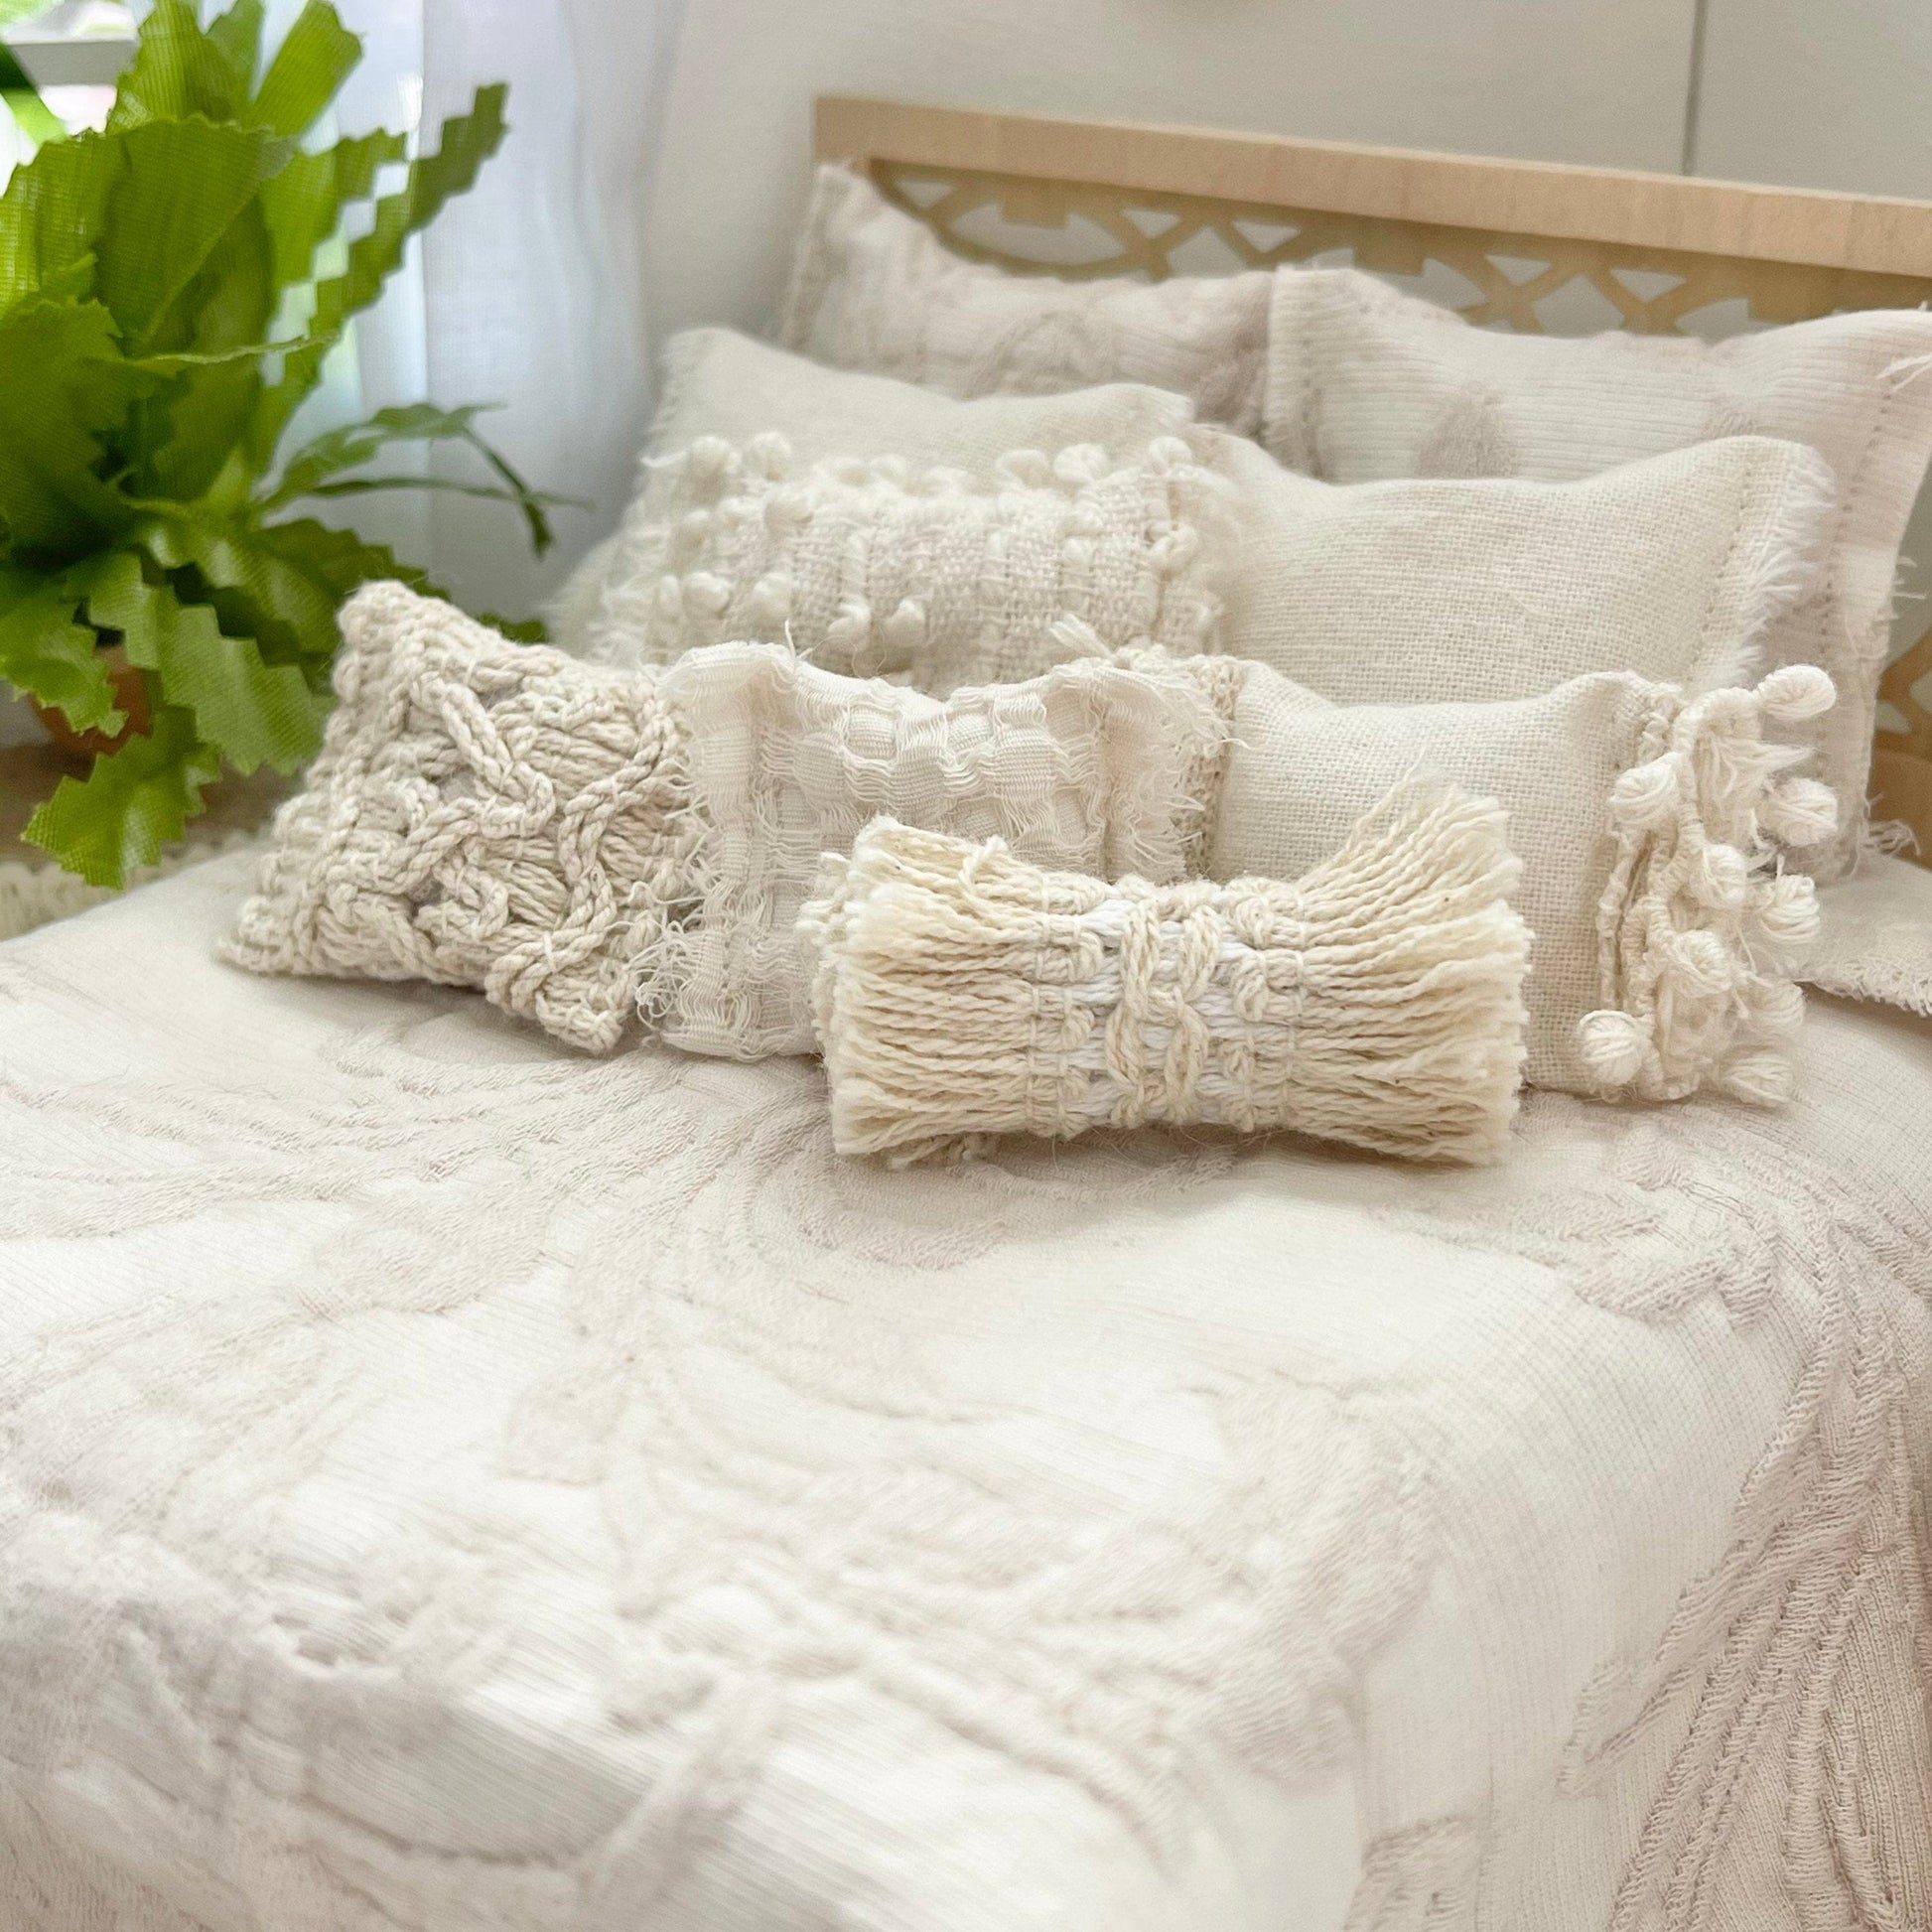 Chantallena Doll House Wanderlust Textured Taupe & Cream Embroidered Frayed Cotton Bedding Set 1:12 Scale